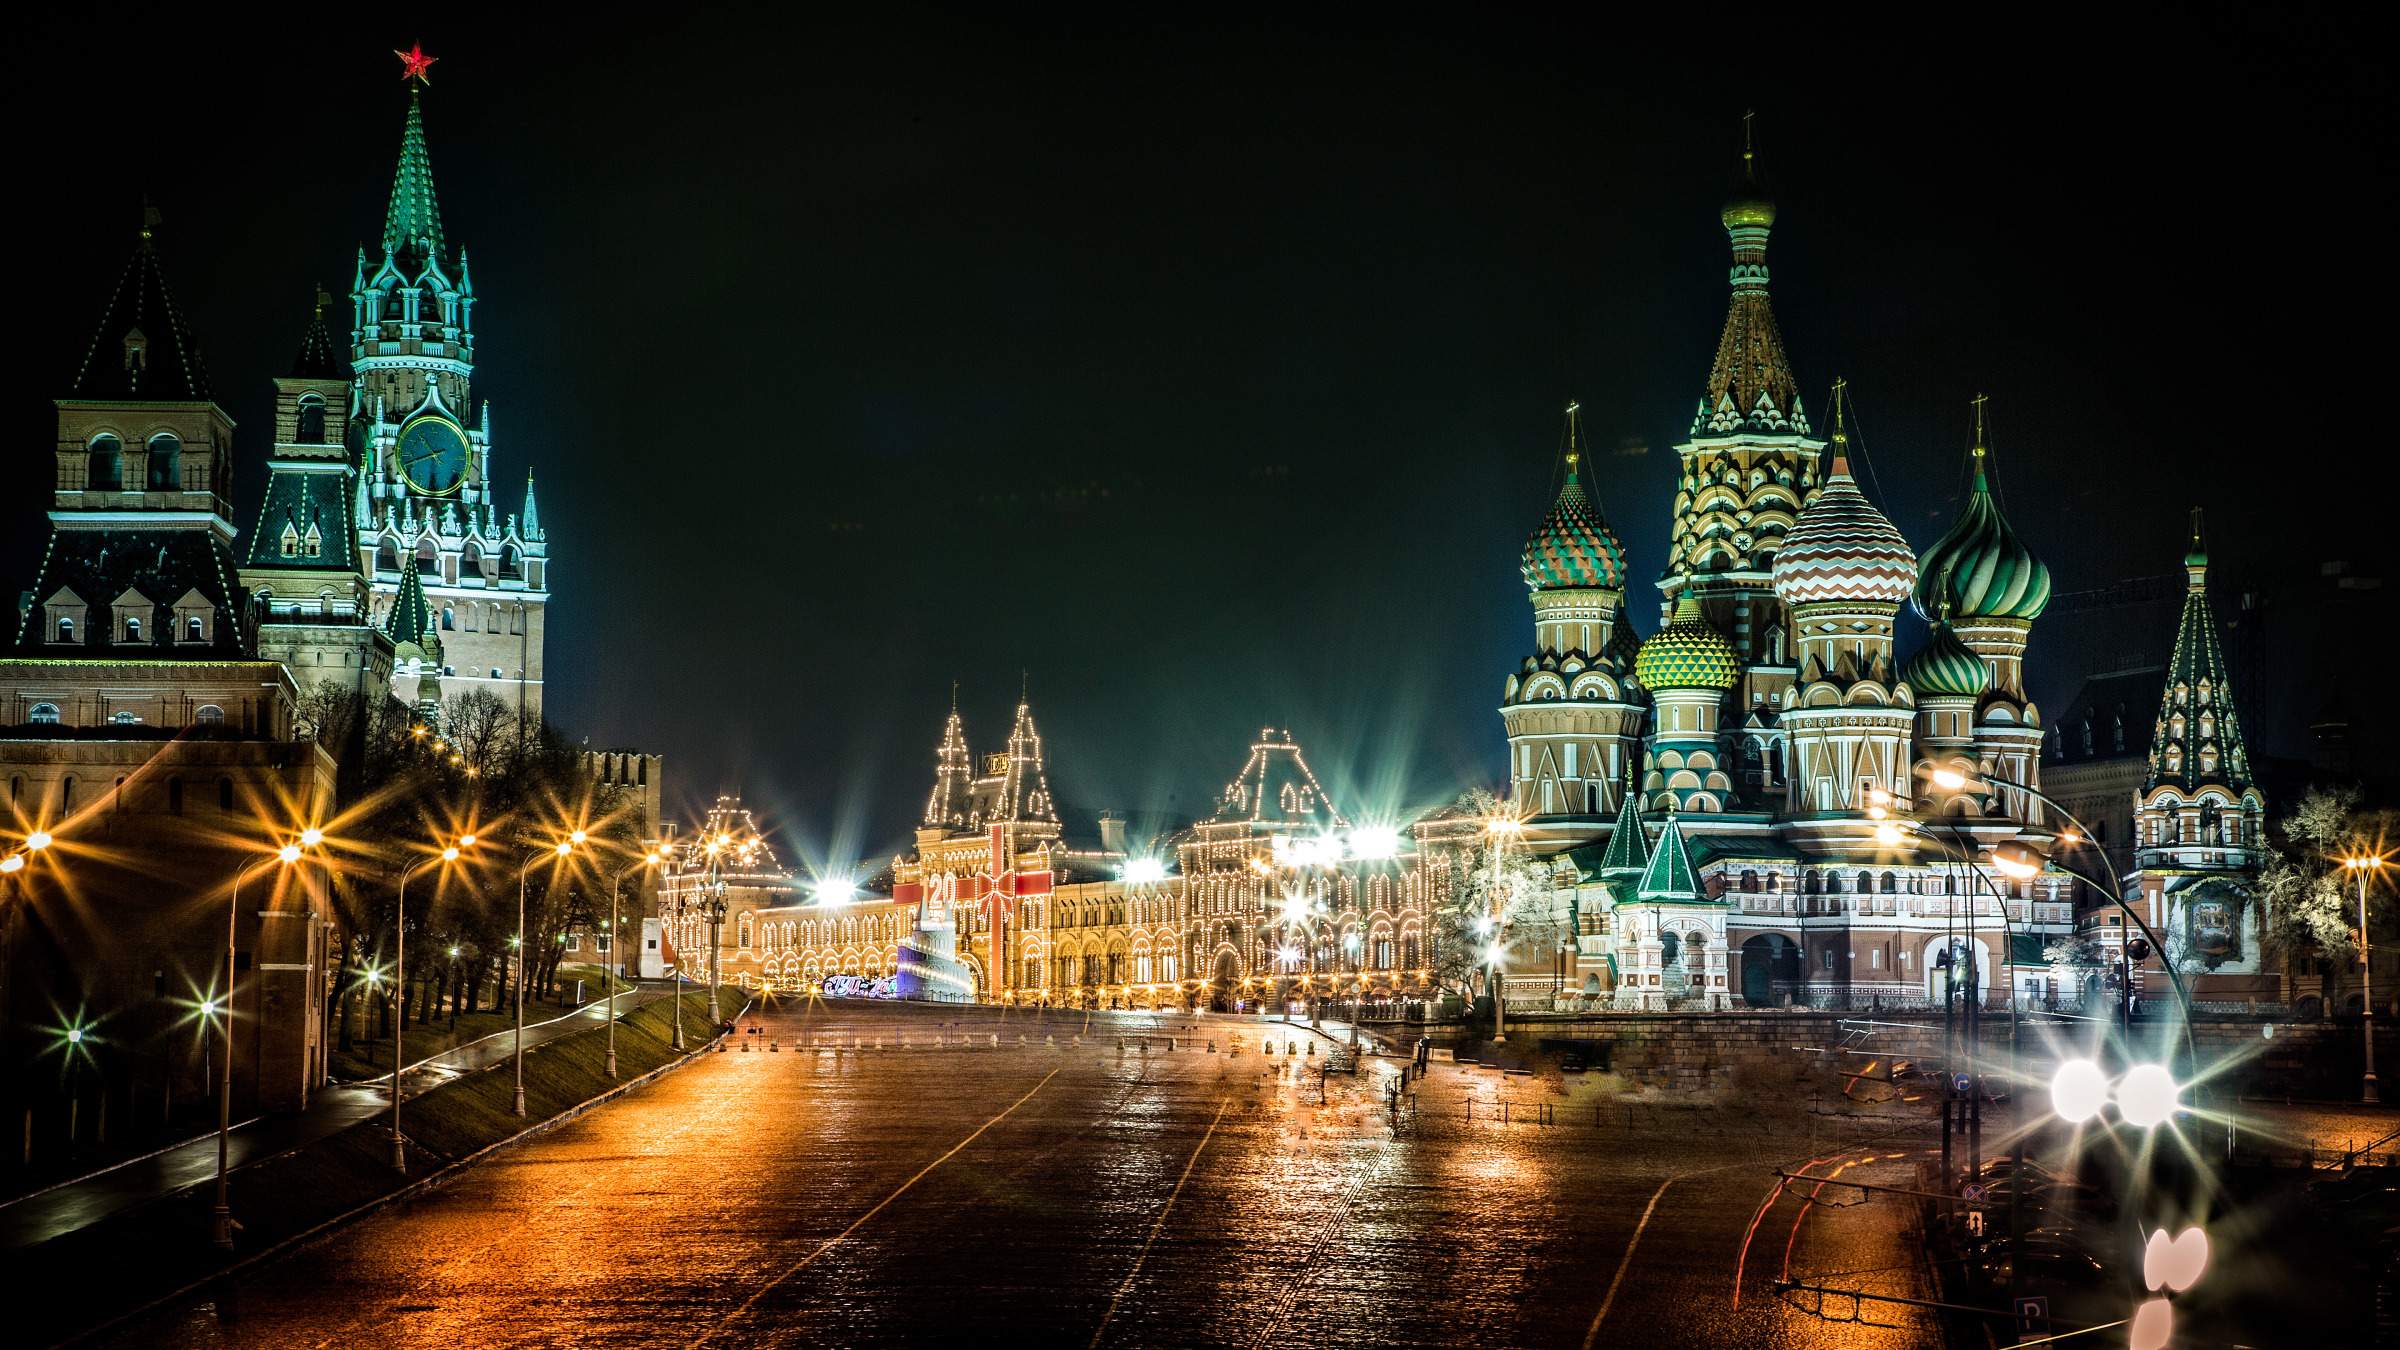 Red Square by Night, Moscow, Russia widescreen wallpaper. Wide